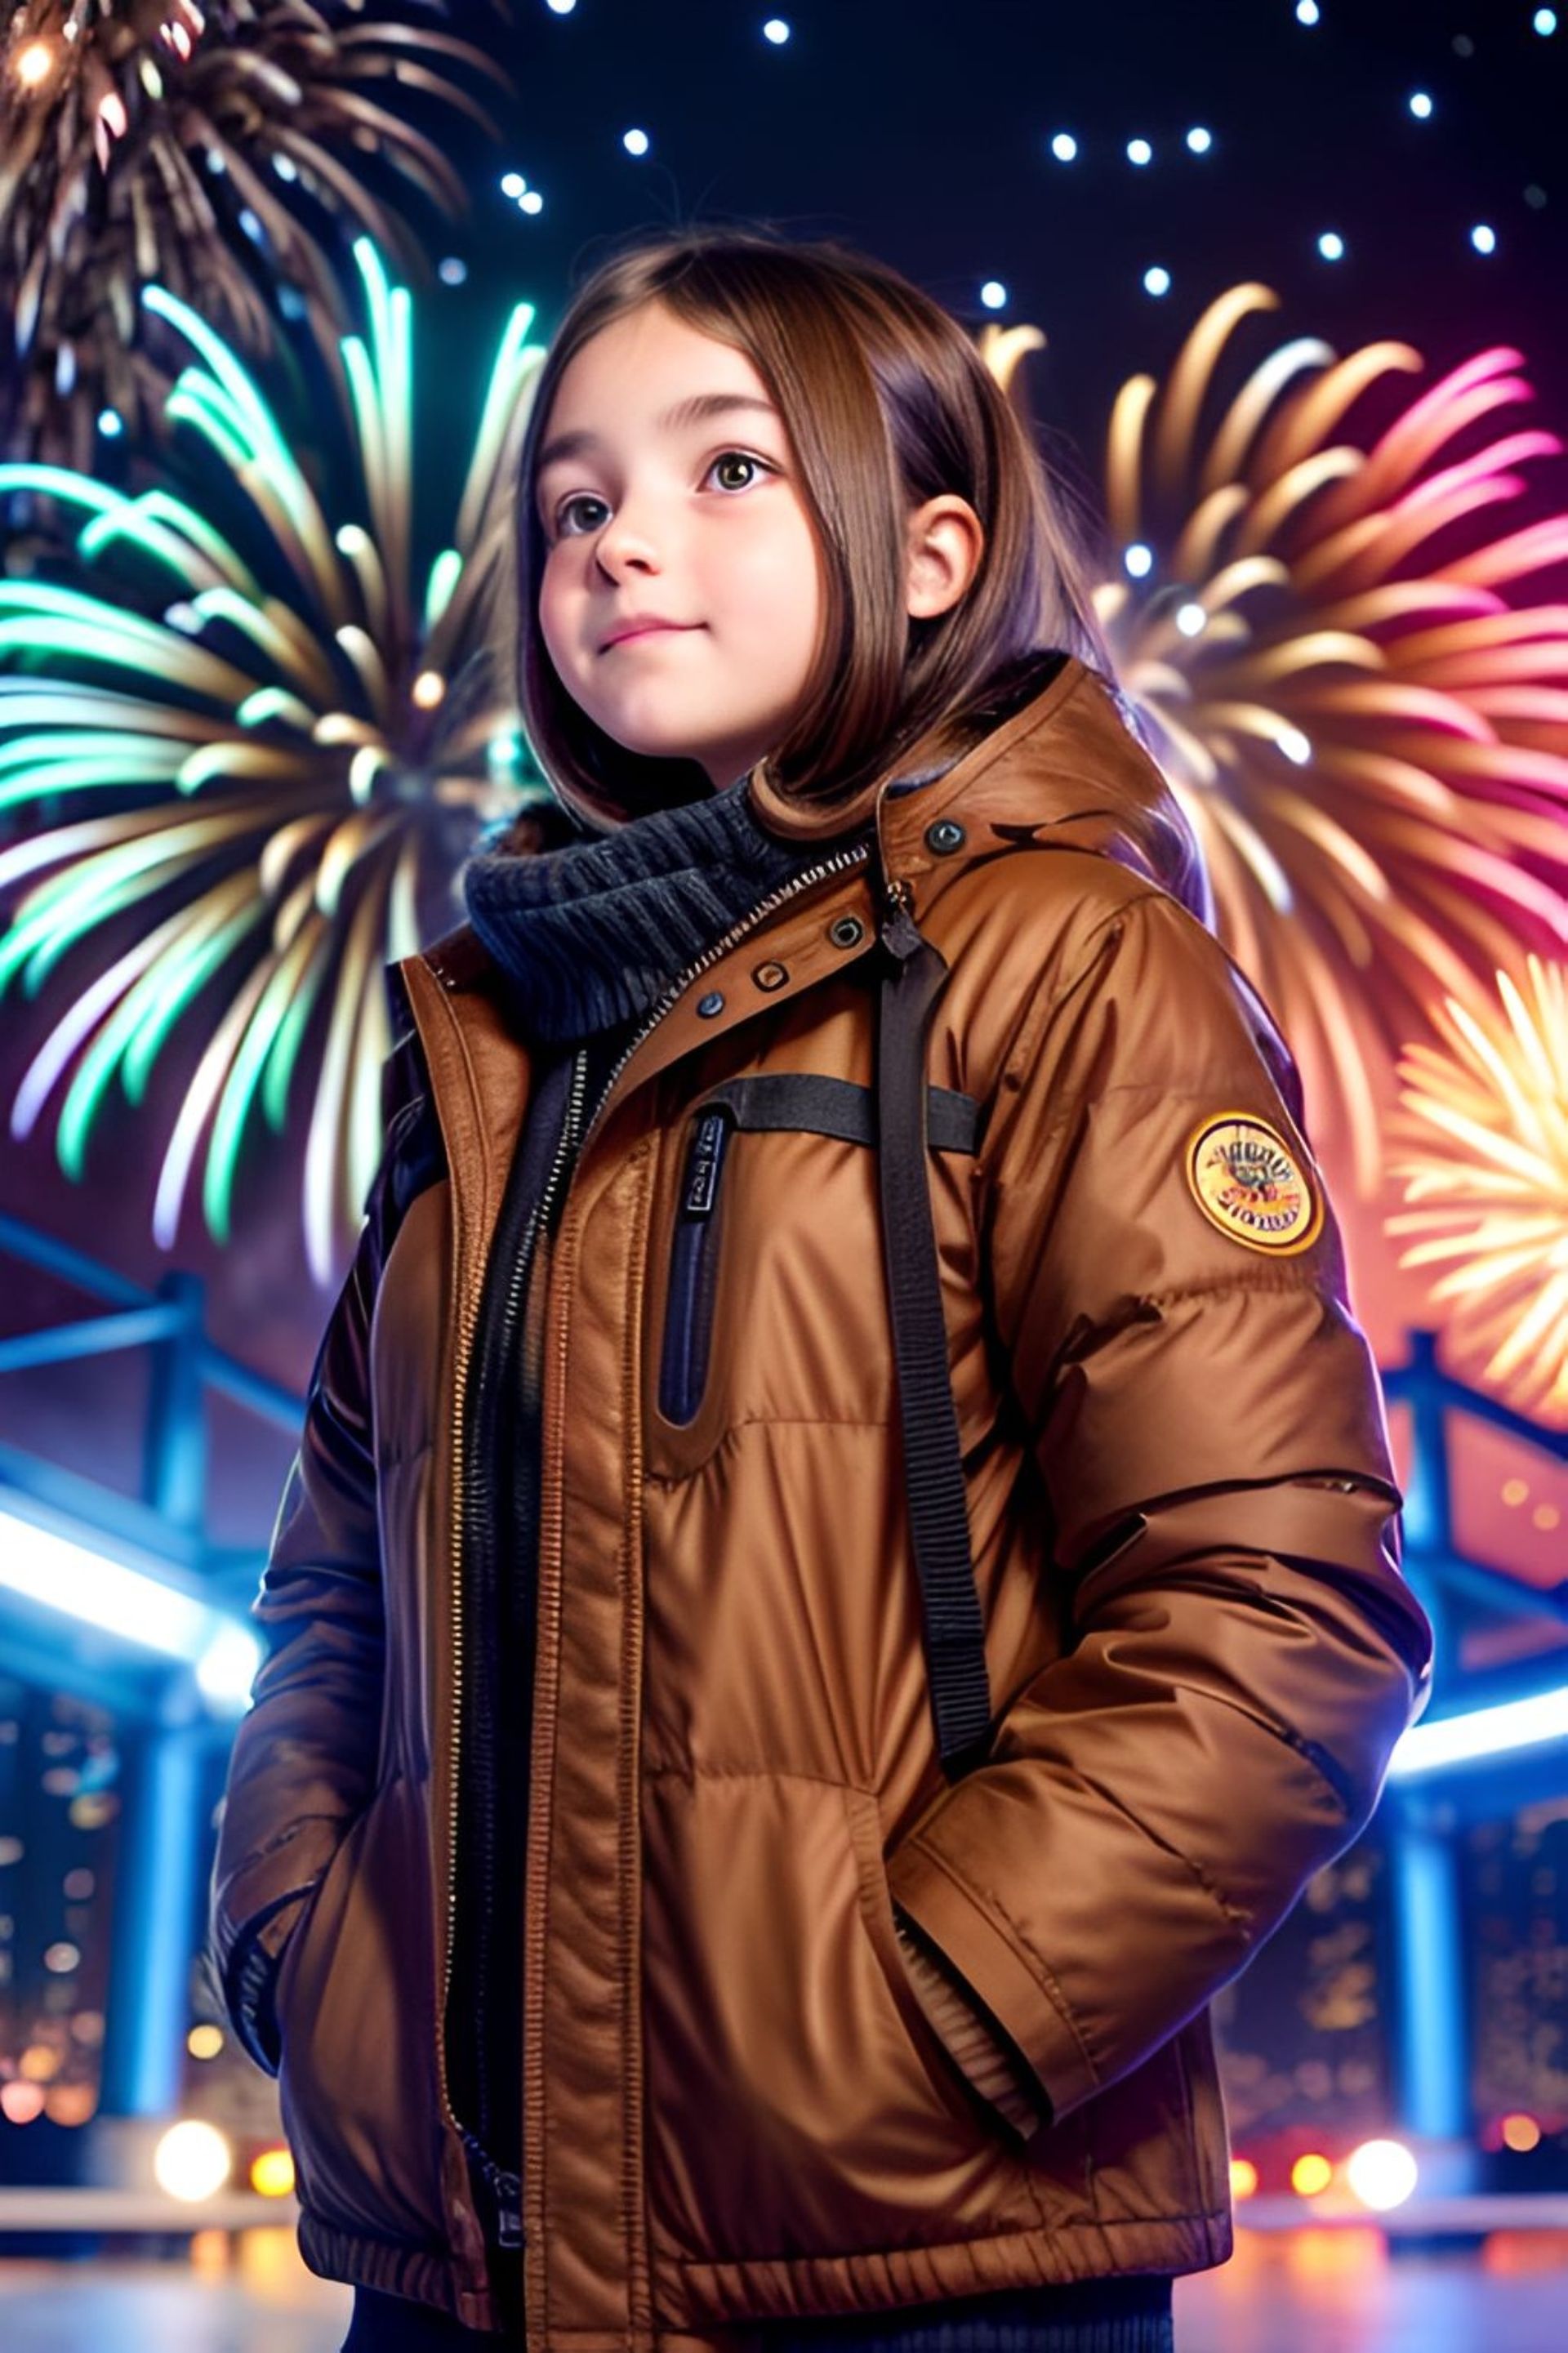 Free photo A beautiful girl, in a jacket, with brown hair, against the background of fireworks